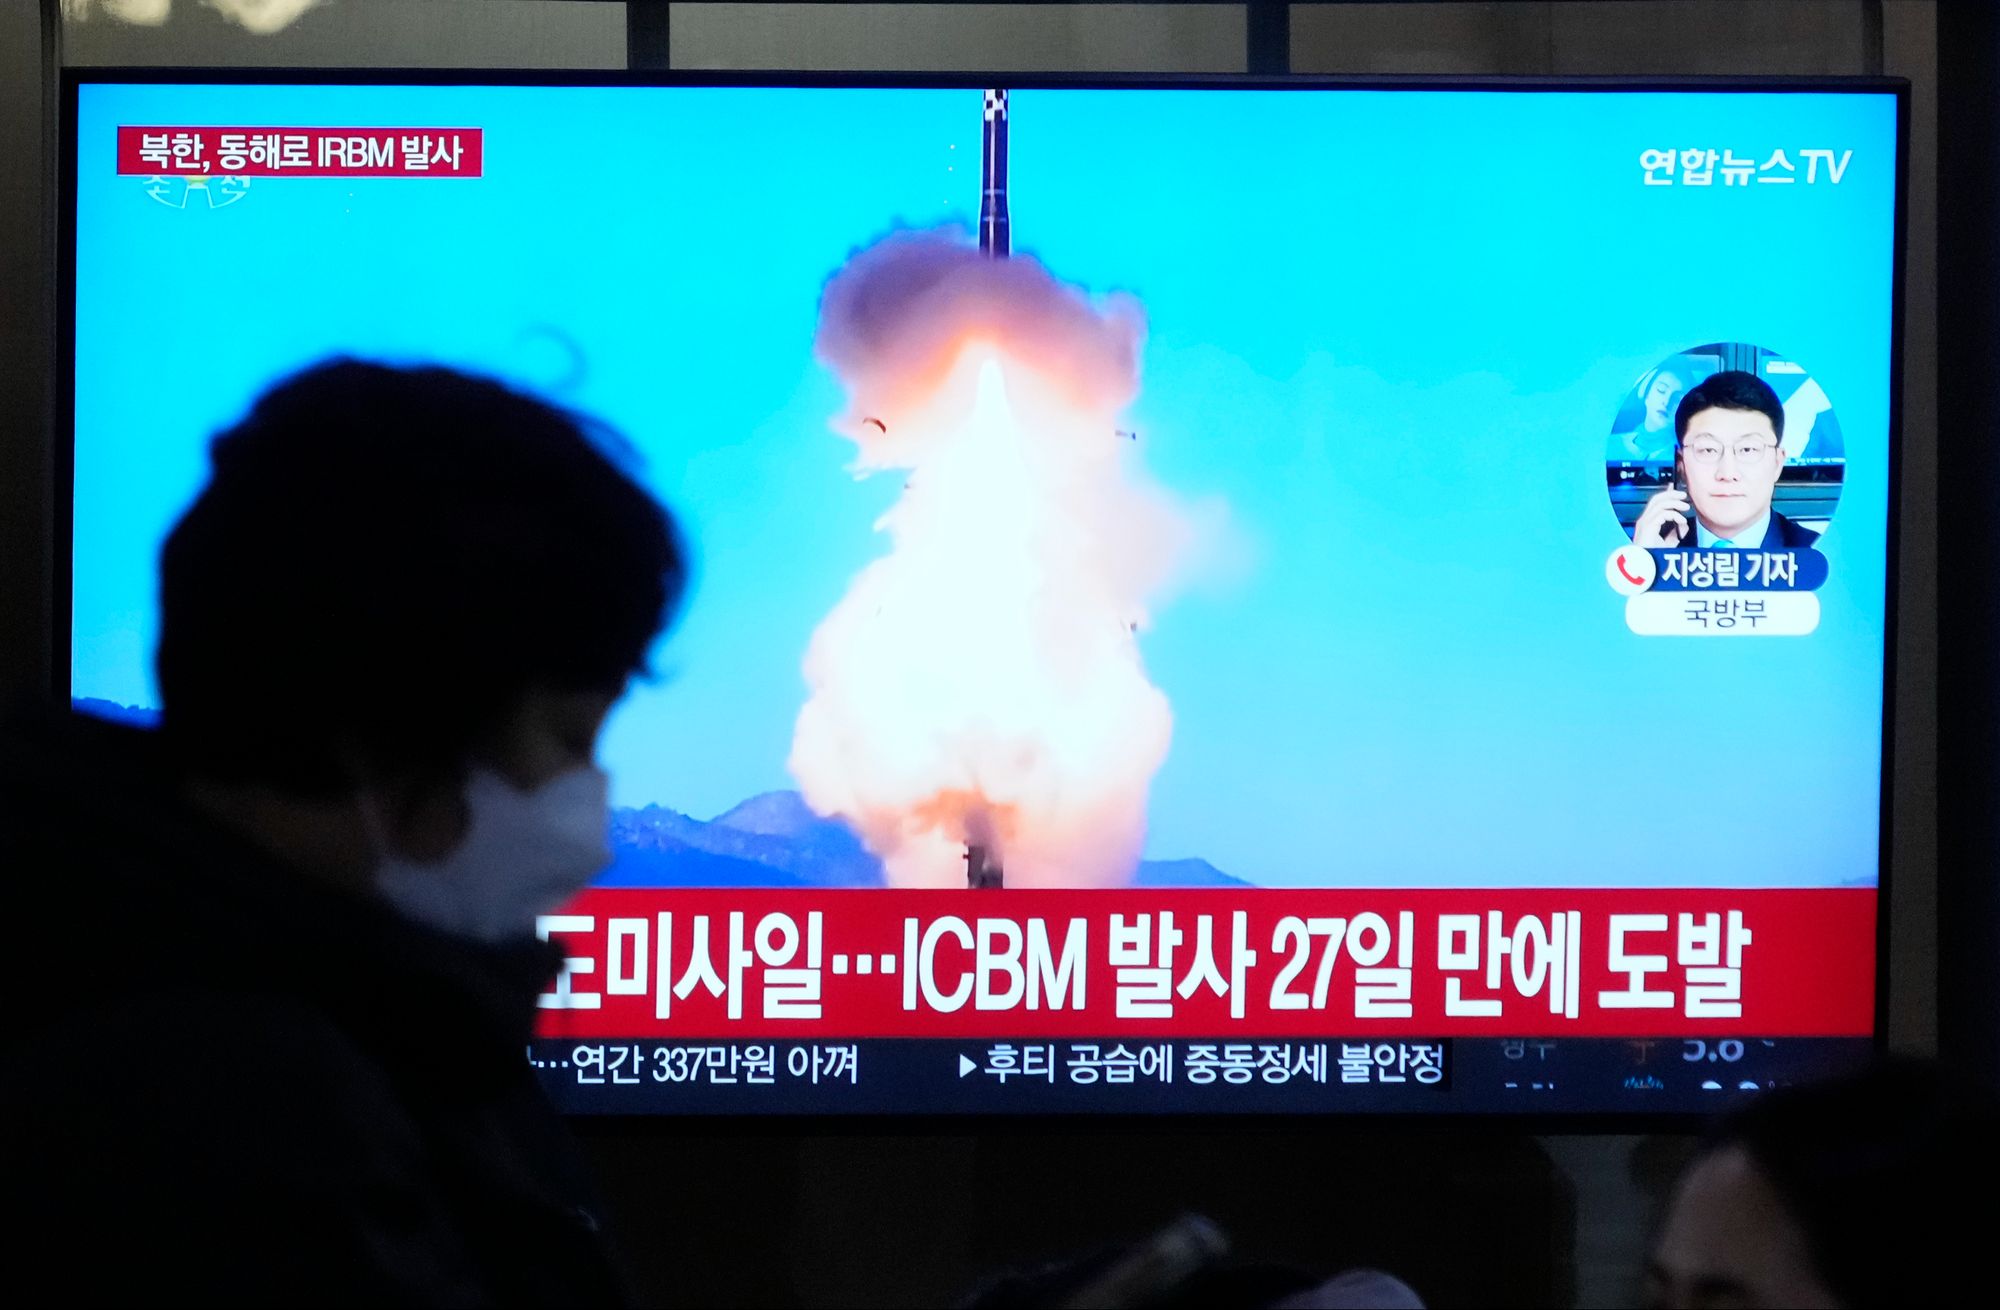 north korea claims it has tested new solid-fuel hypersonic missile